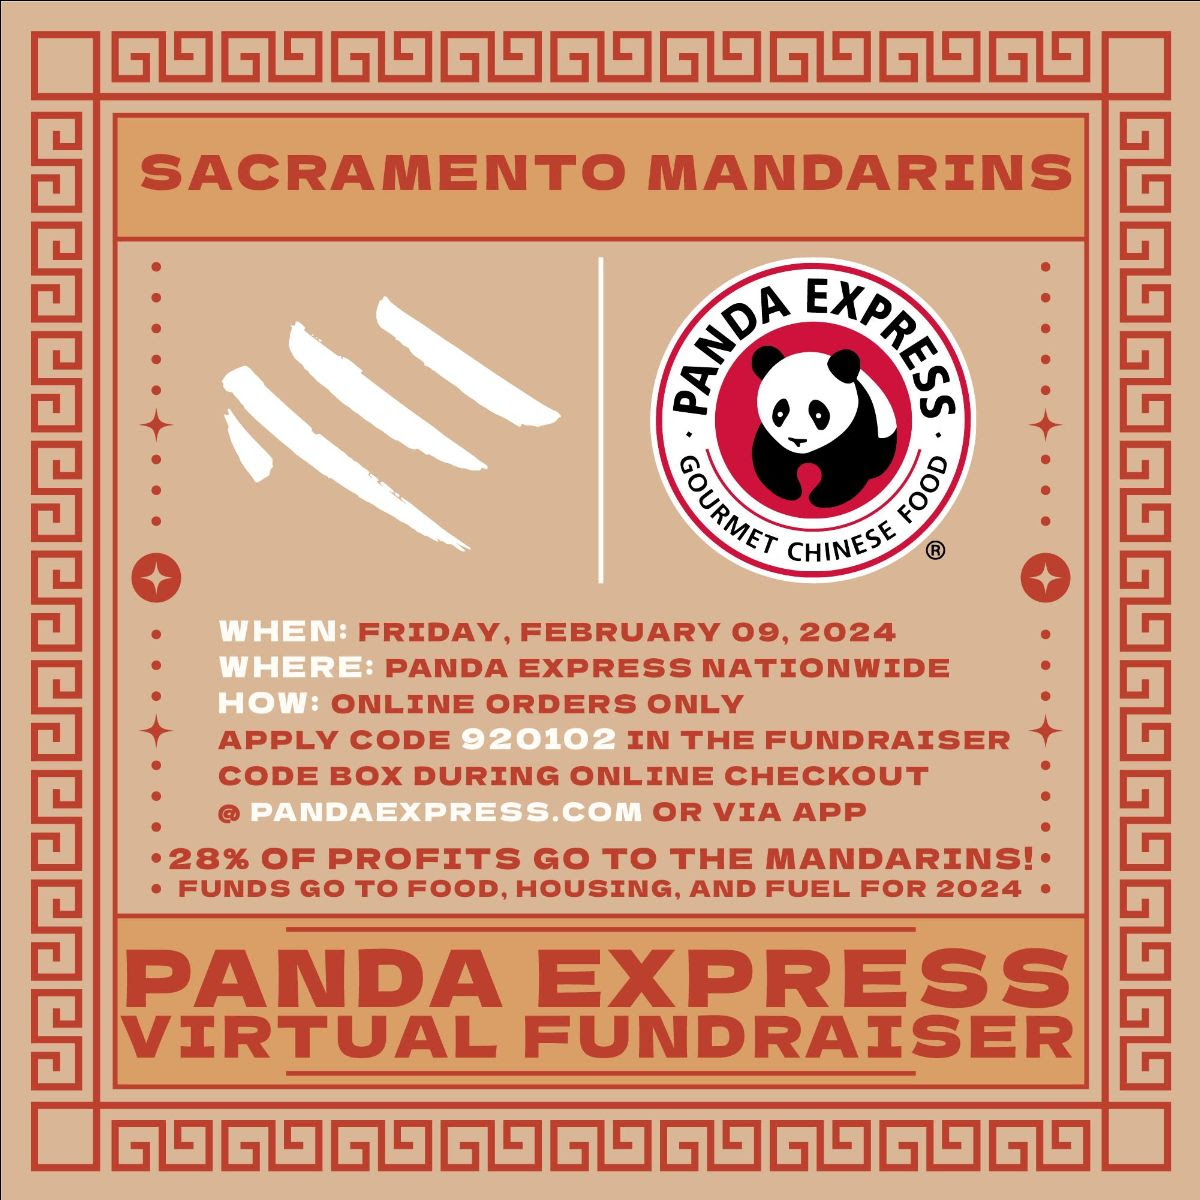 Kick off Chinese New Years with us today with our nationwide Panda Express Virtual Community Fundraiser! Order online through the Panda Express app or at pandaexpress.com for pickup or delivery, and apply code 920102 in the Fundraiser Code box during online checkout!